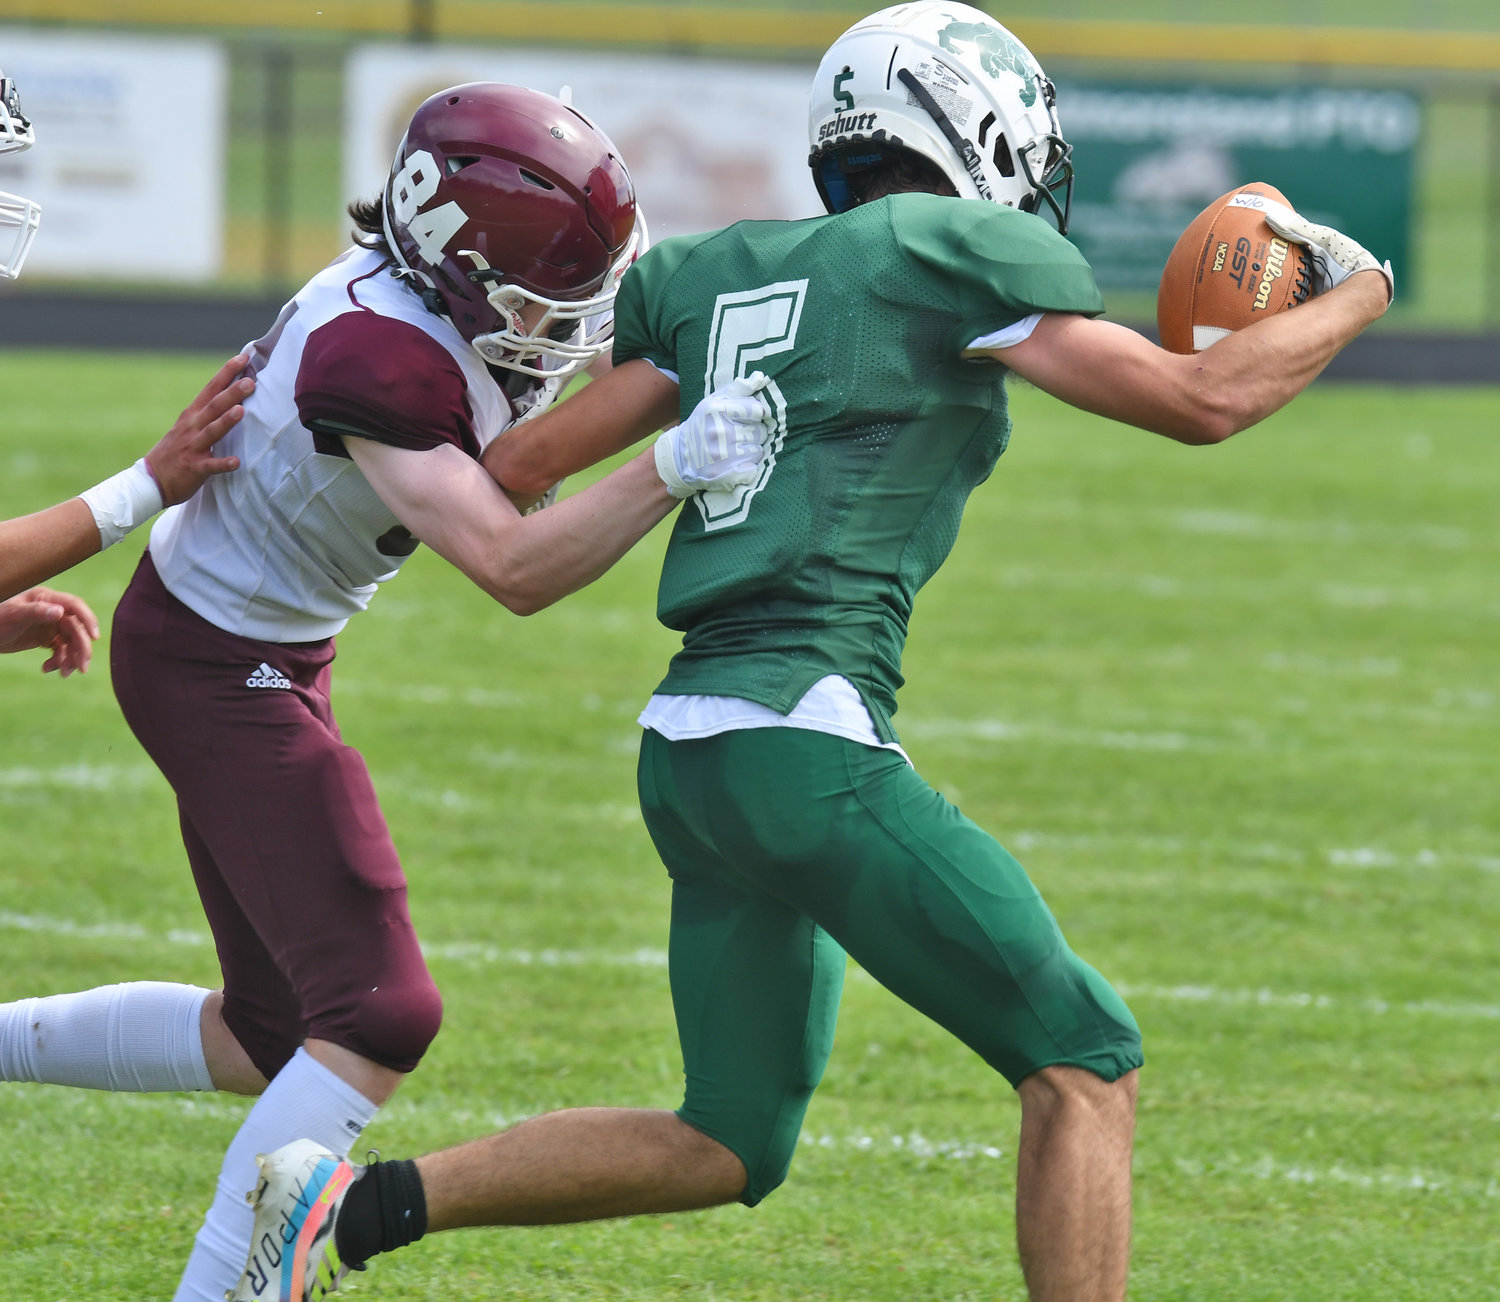 Westmoreland/Oriskany's  Cameron Rautenstrauch zips around end for a gain before being tackled by Clinton's Ronan Milne during Saturday afternoon's non-league game in Westmoreland. The Warriors won 28-6.